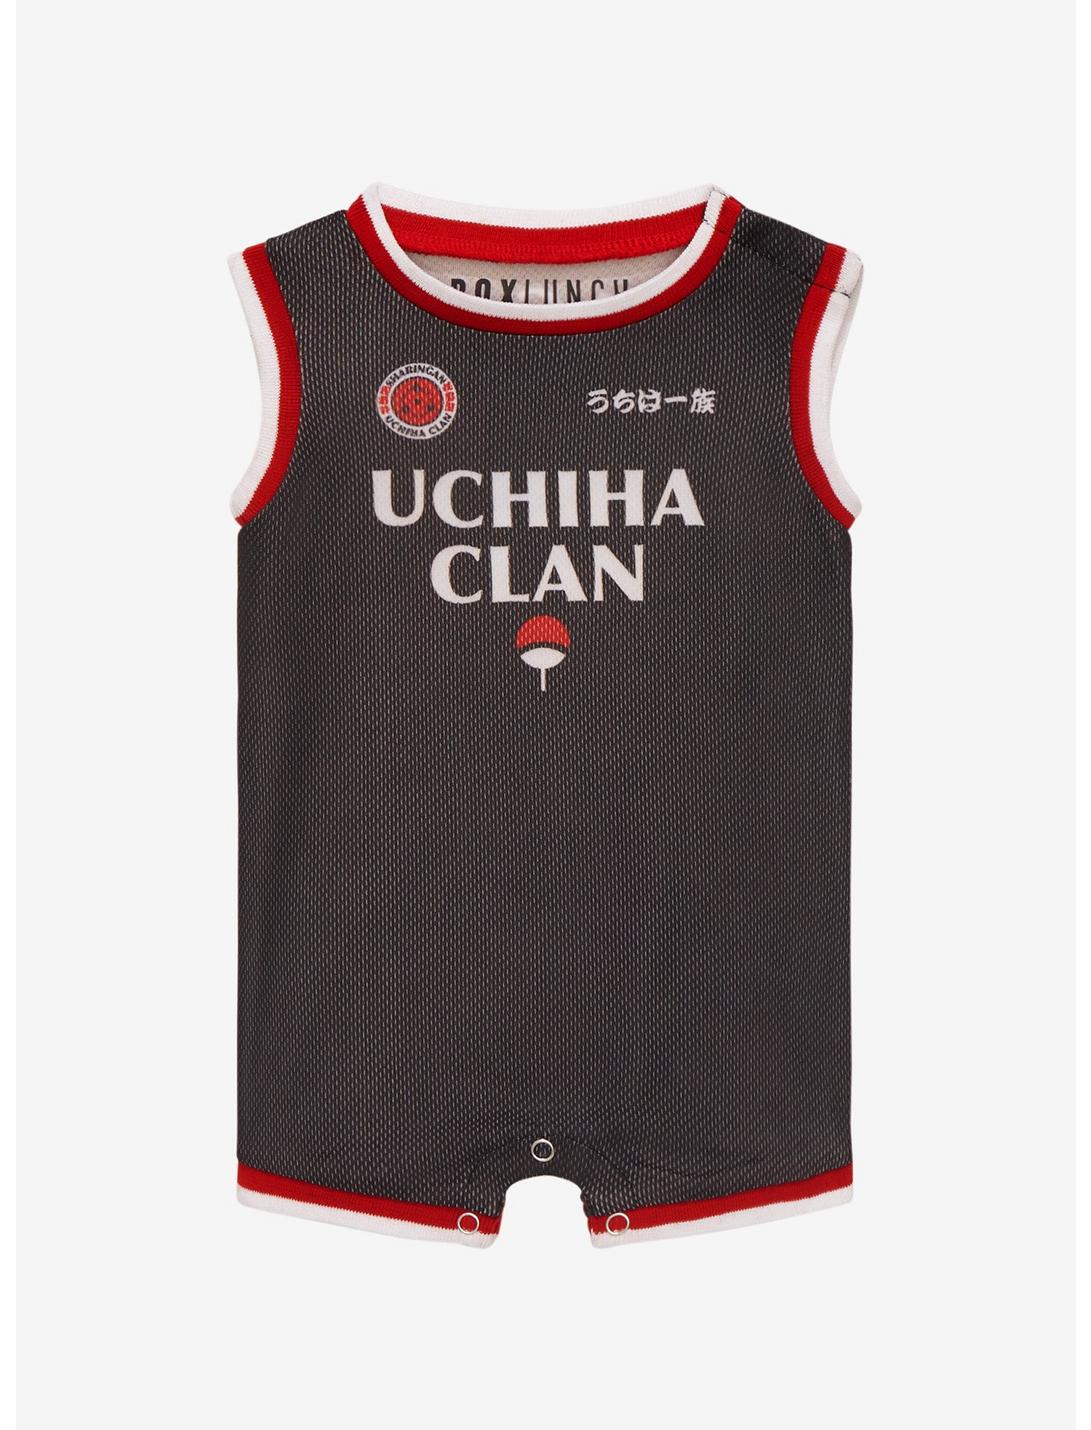 Naruto Shippuden Uchiha Clan Infant Basketball Jersey Romper - BoxLunch Exclusive, BLACK, hi-res